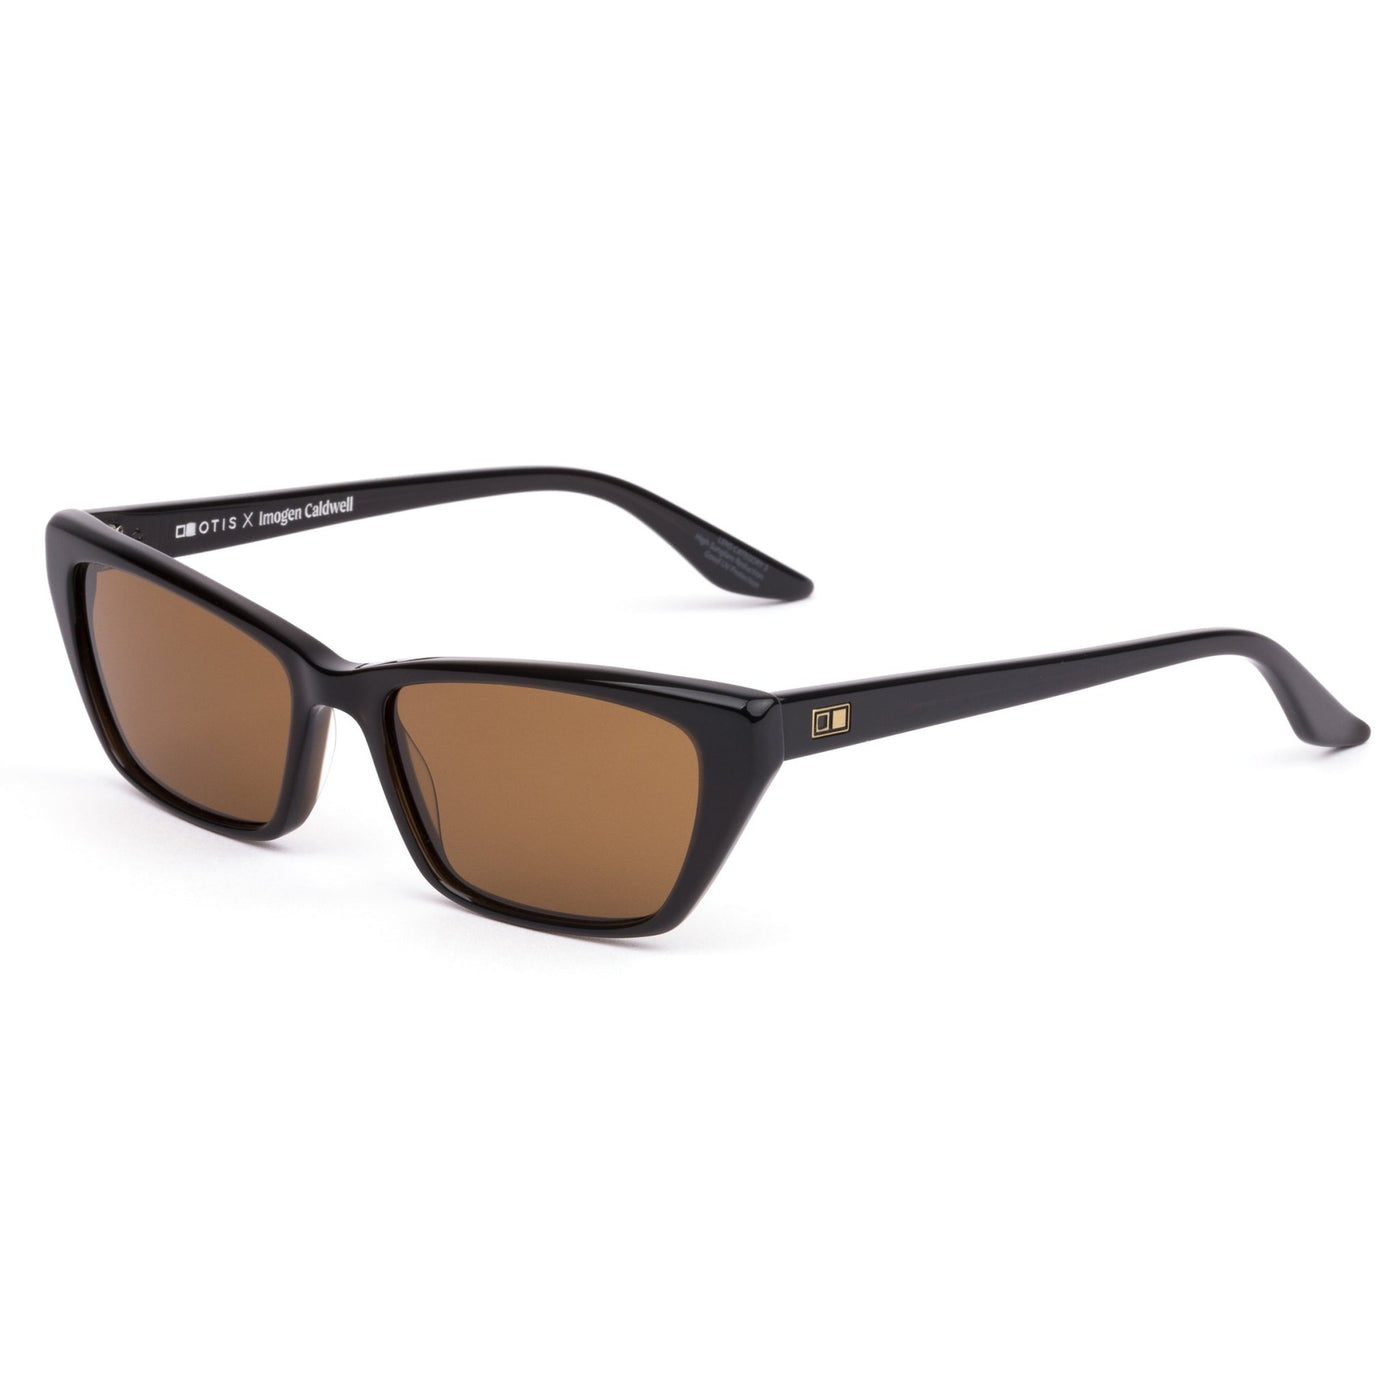 Brown Cat eye sunglasses facing the side